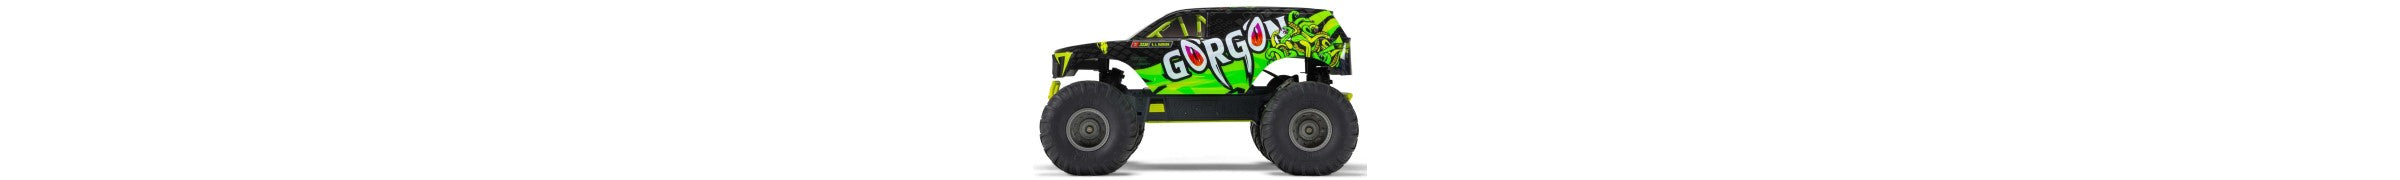 Parts for ARA3230S 1/10 Gorgon 2wd RC Monster Truck